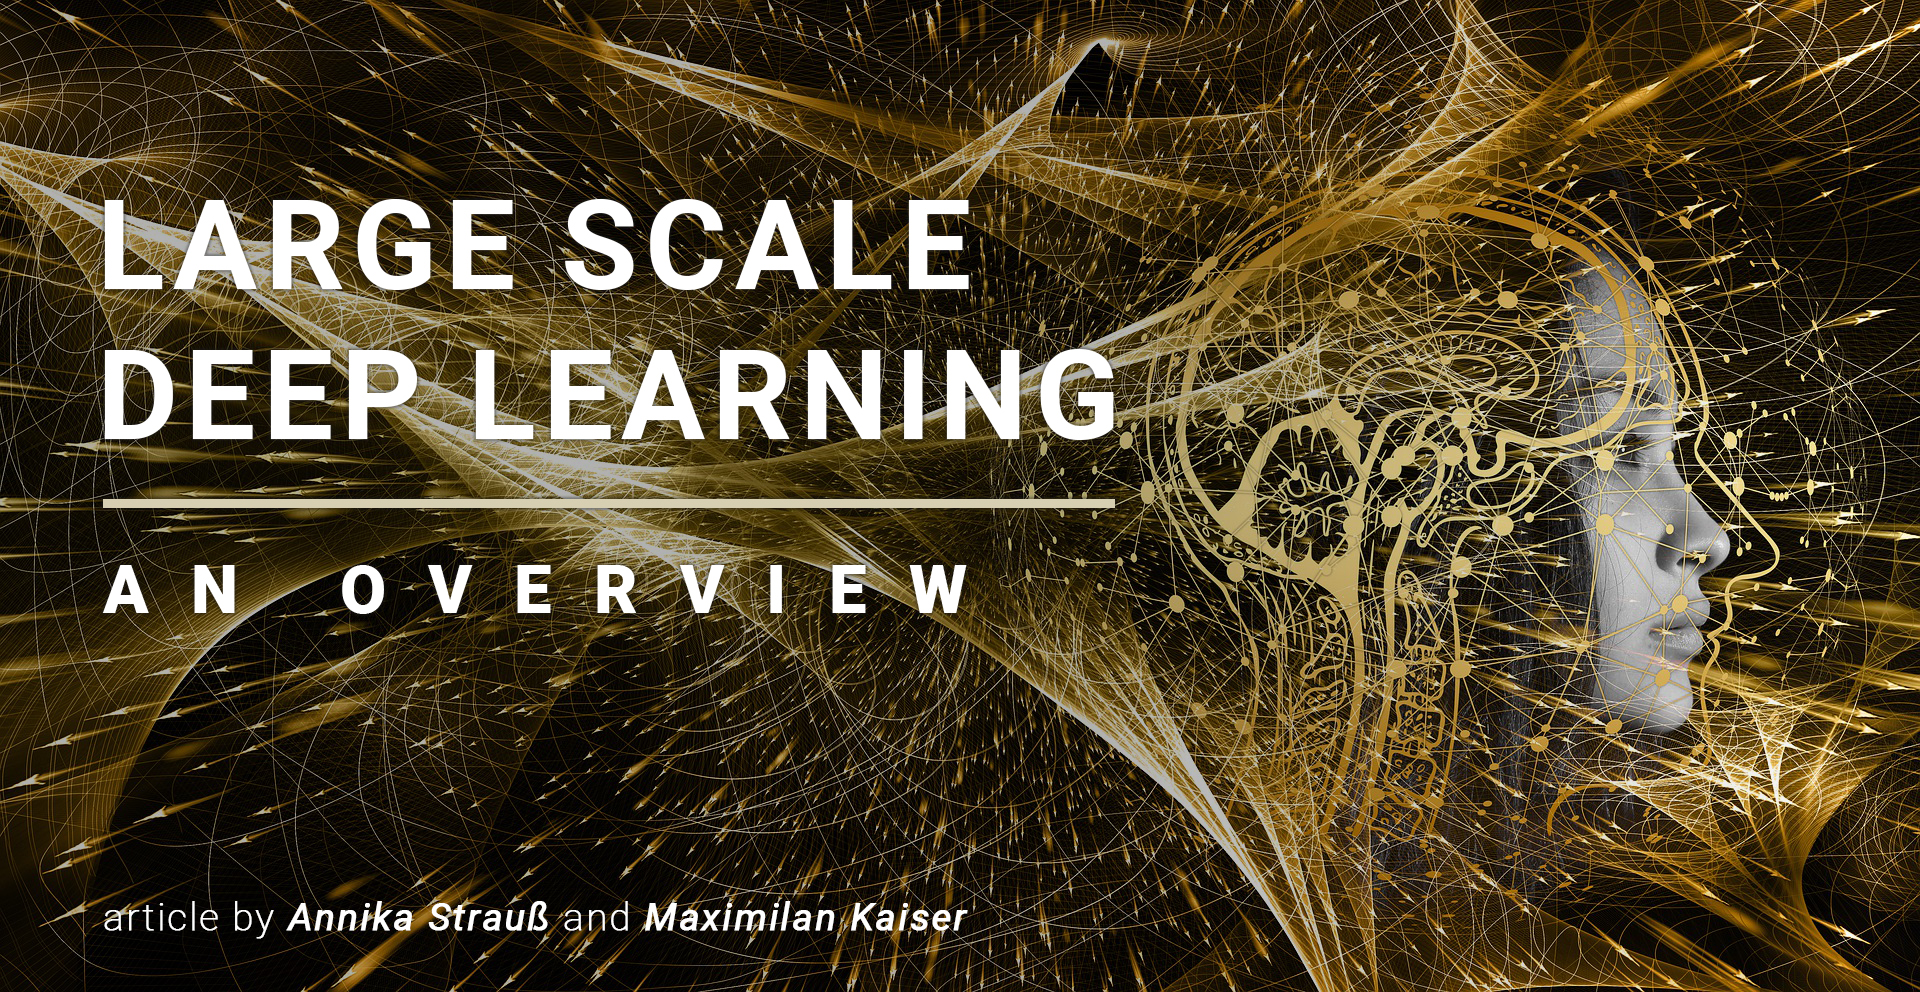 An overview of Large Scale Deep Learning